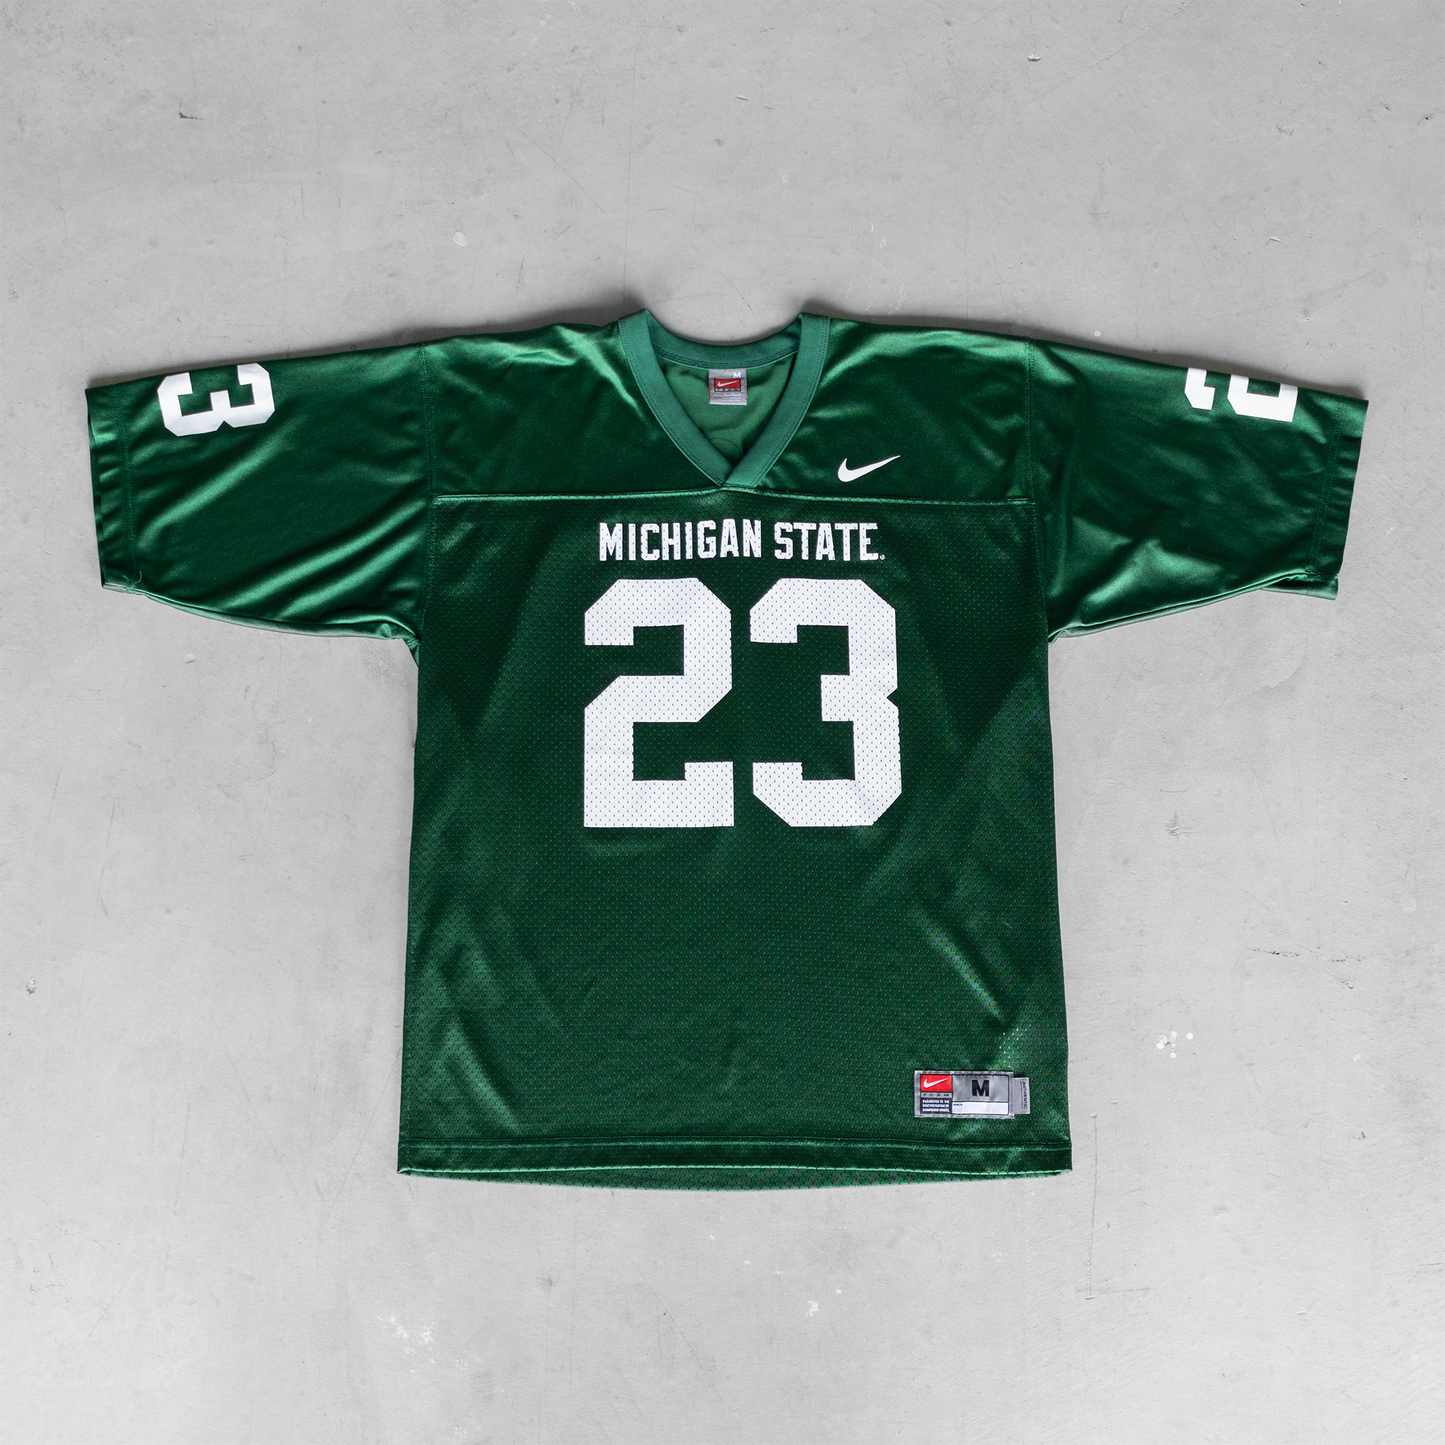 Vintage Nike Michigan State Spartans #23 Football Jersey (M)